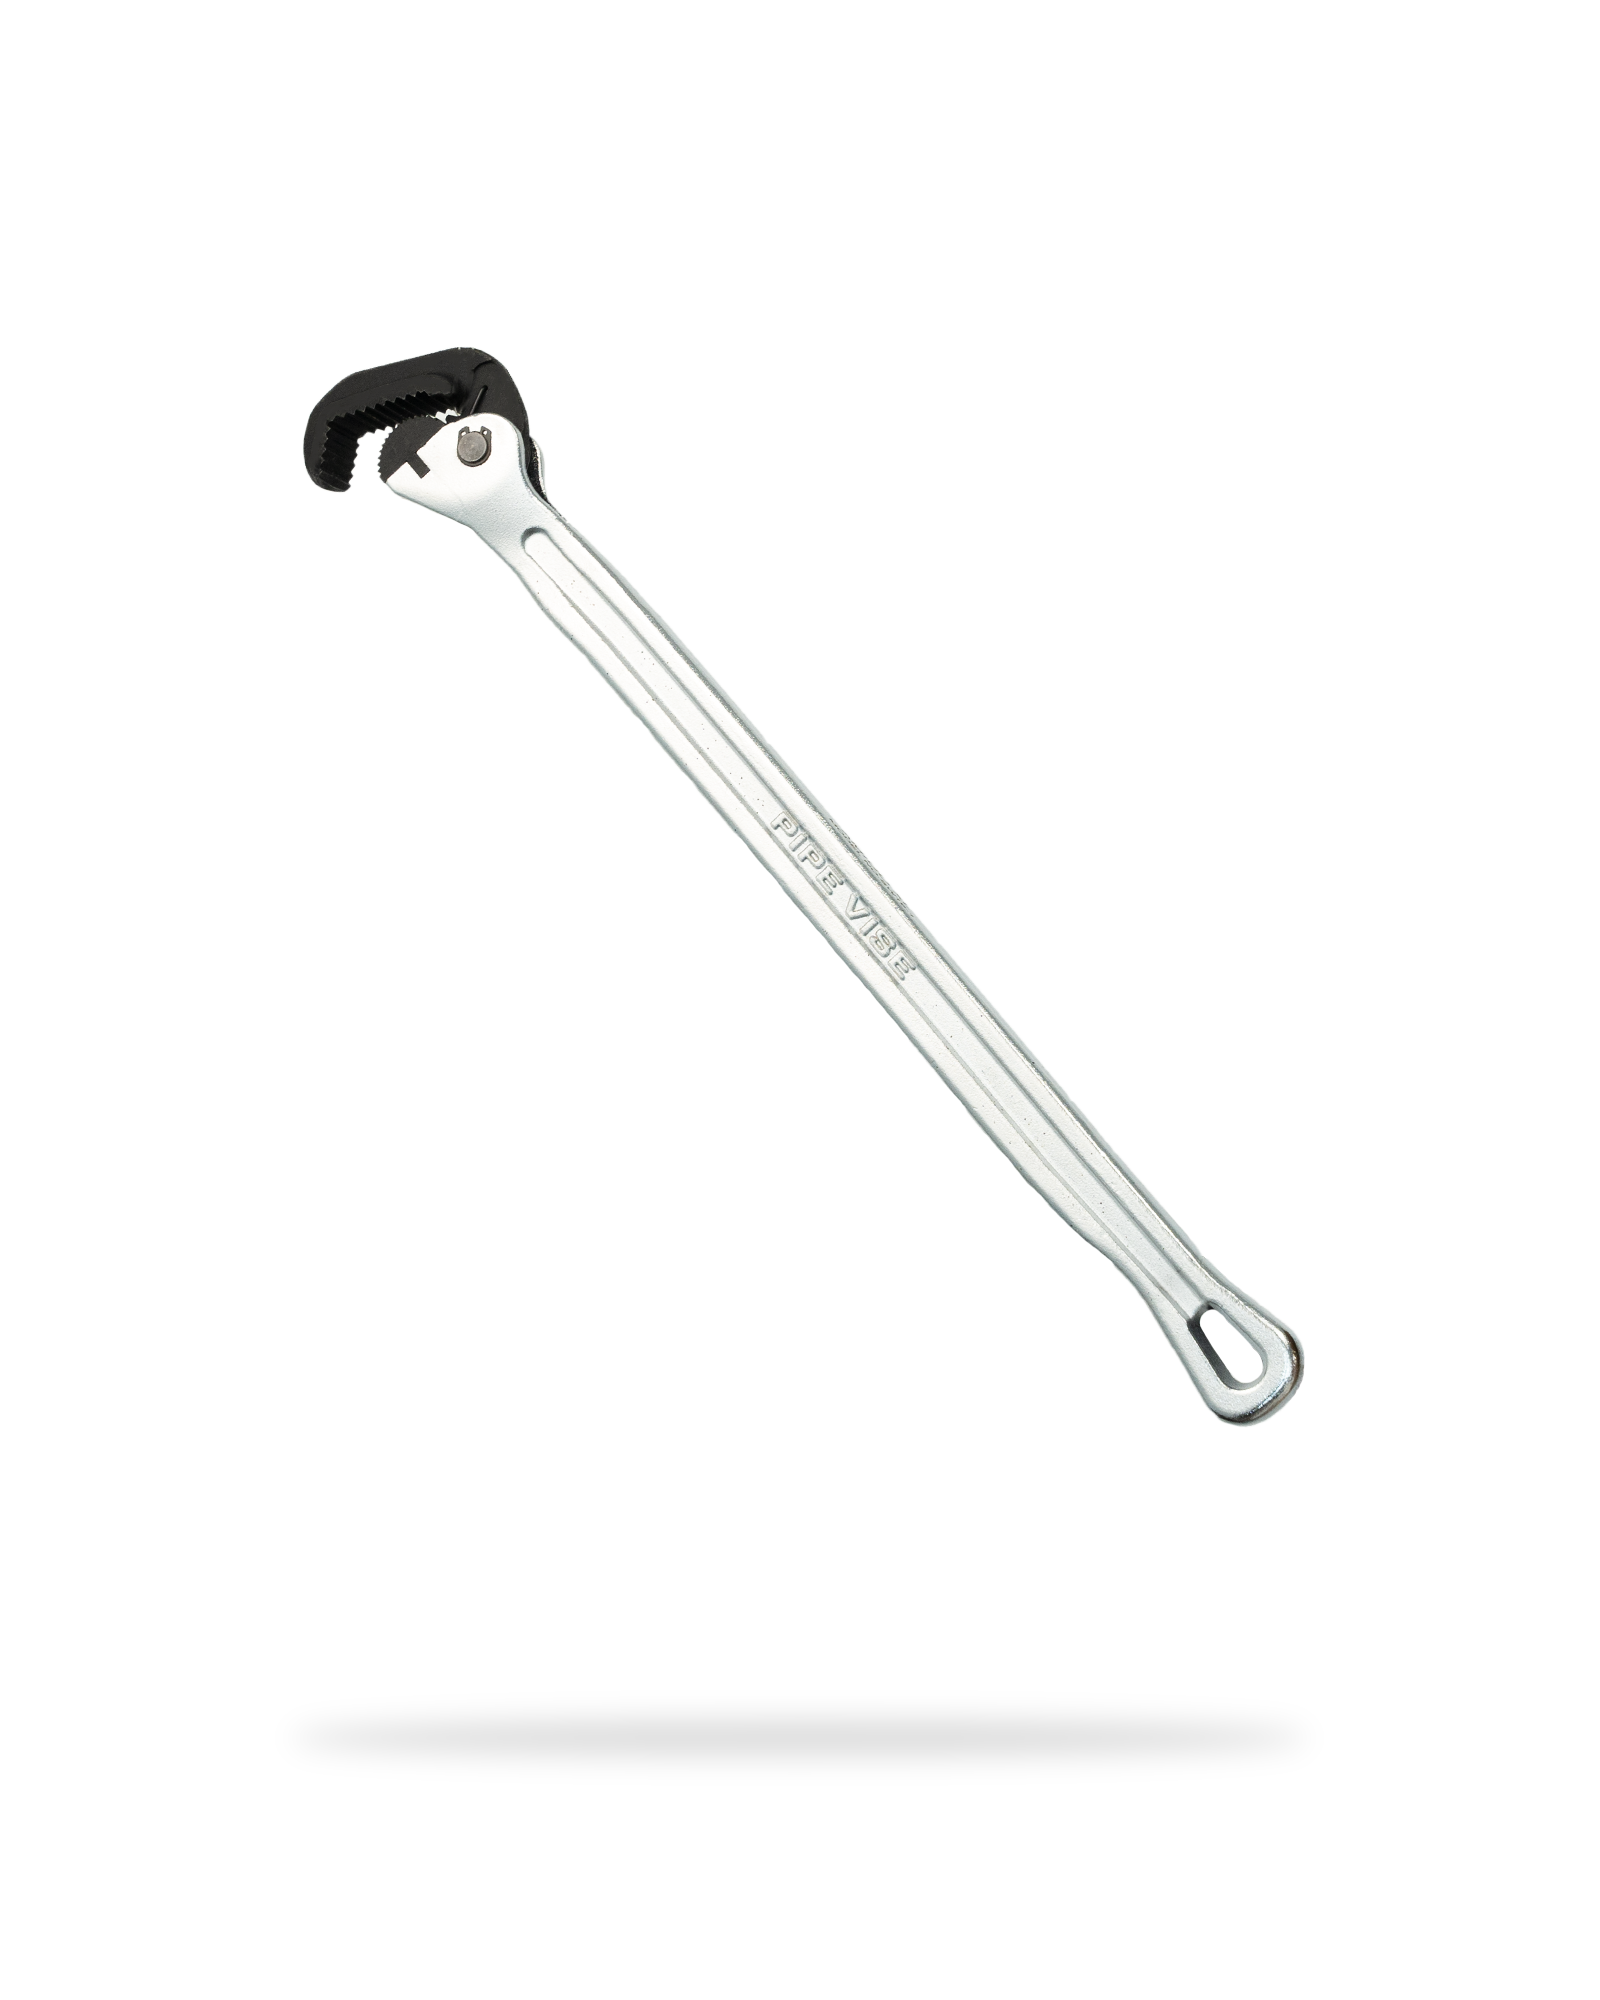 taparia-Pipe-Wrench Ring PANA : Amazon.in: Home Improvement